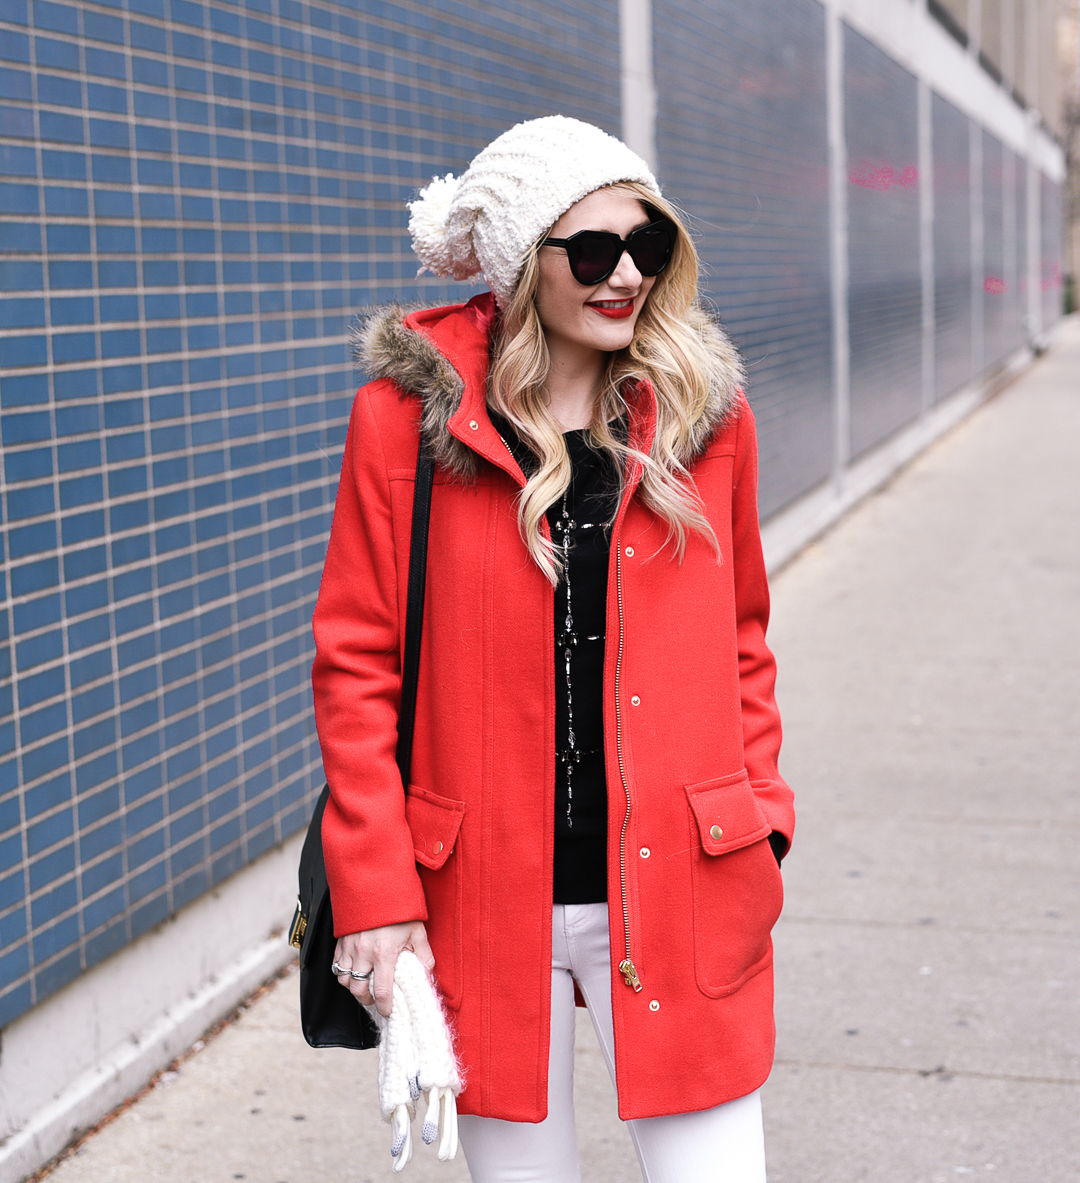 Jenna Colgrove wearing an embellished sweater, red fur parka, and white beanie.